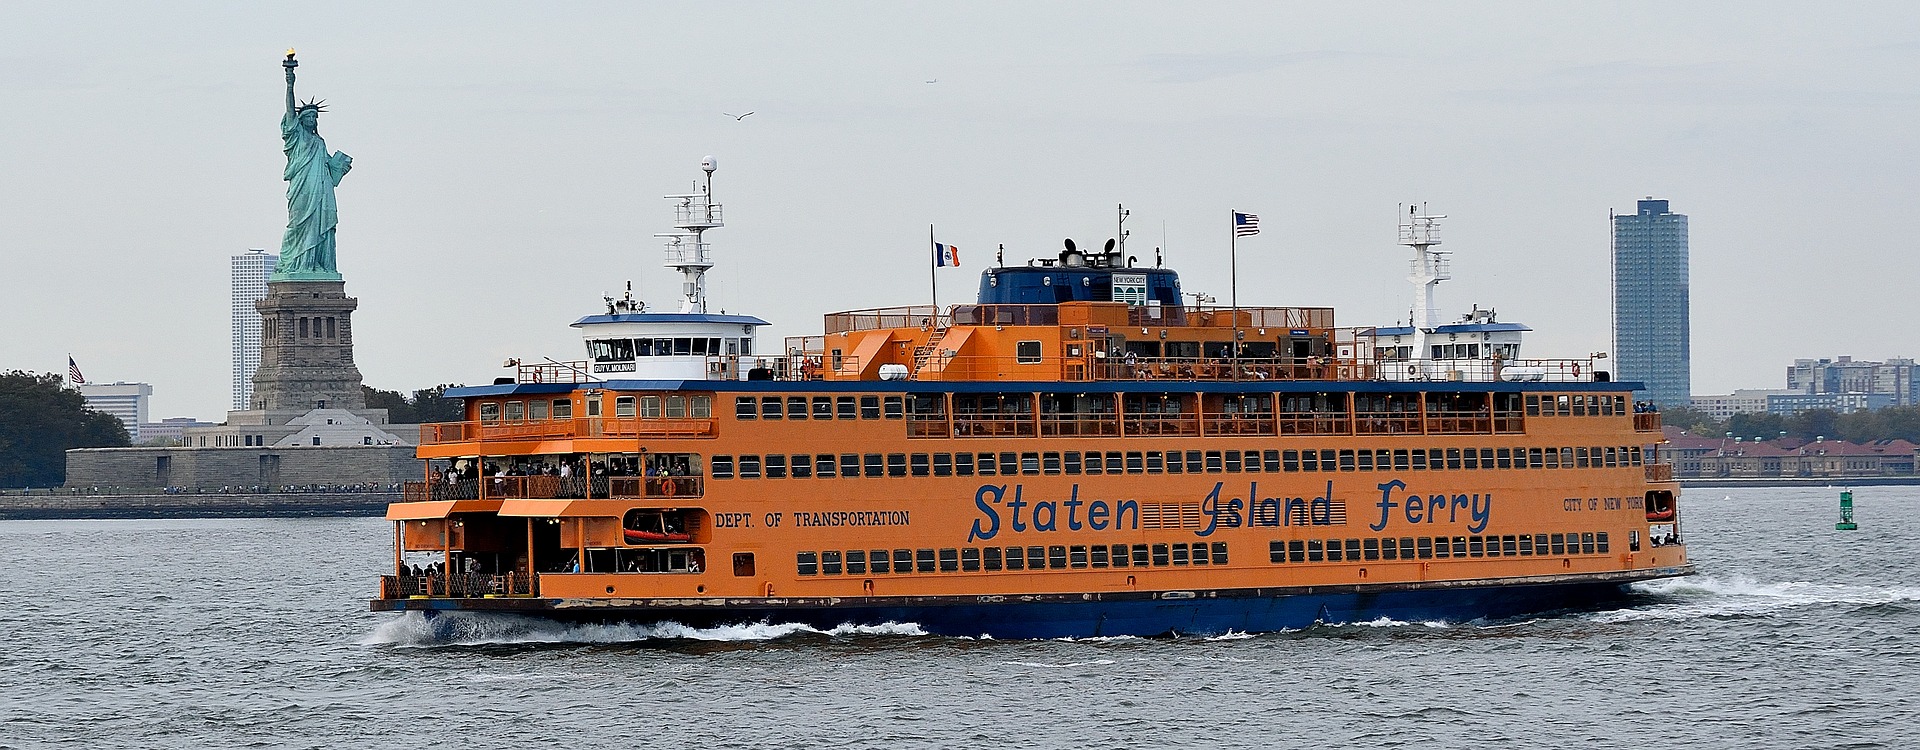 Ferry Boat Ride in Staten Island, New York | Goodwill Car Donations